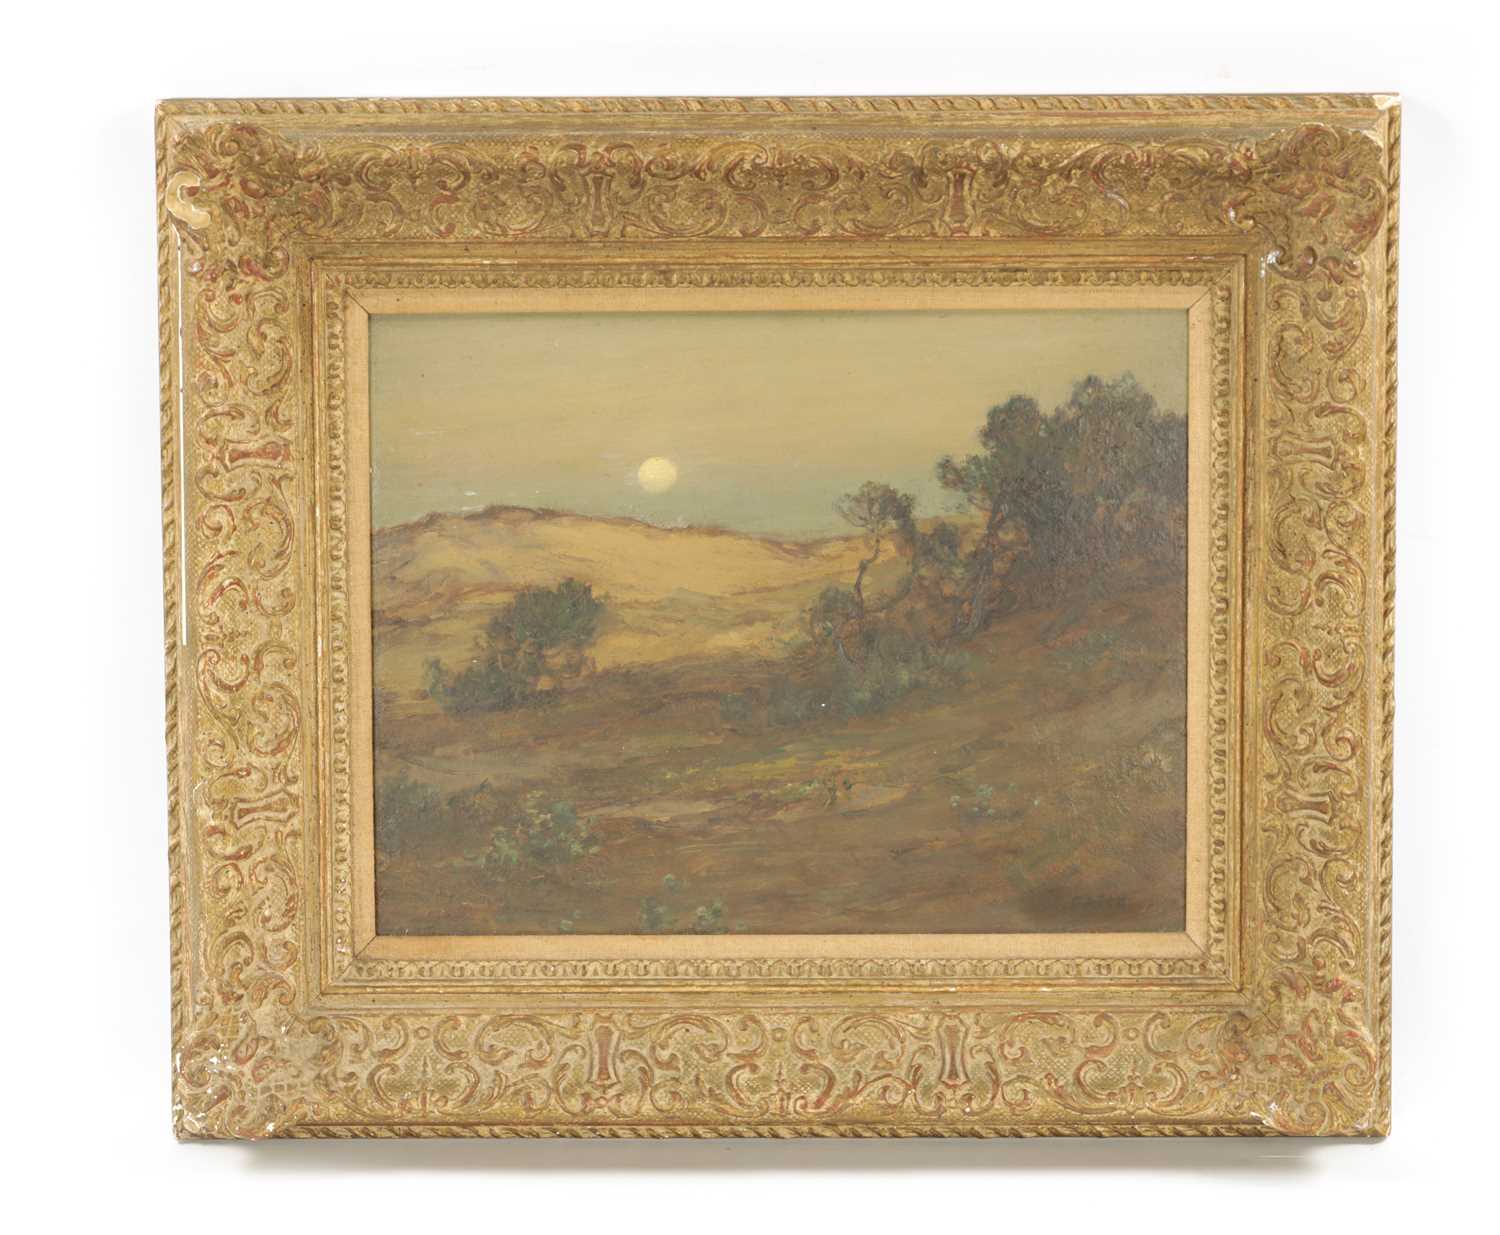 Lot 1134 - JEAN-CHARLES CAZIN (FRENCH, 1841-1901) OIL ON BOARD